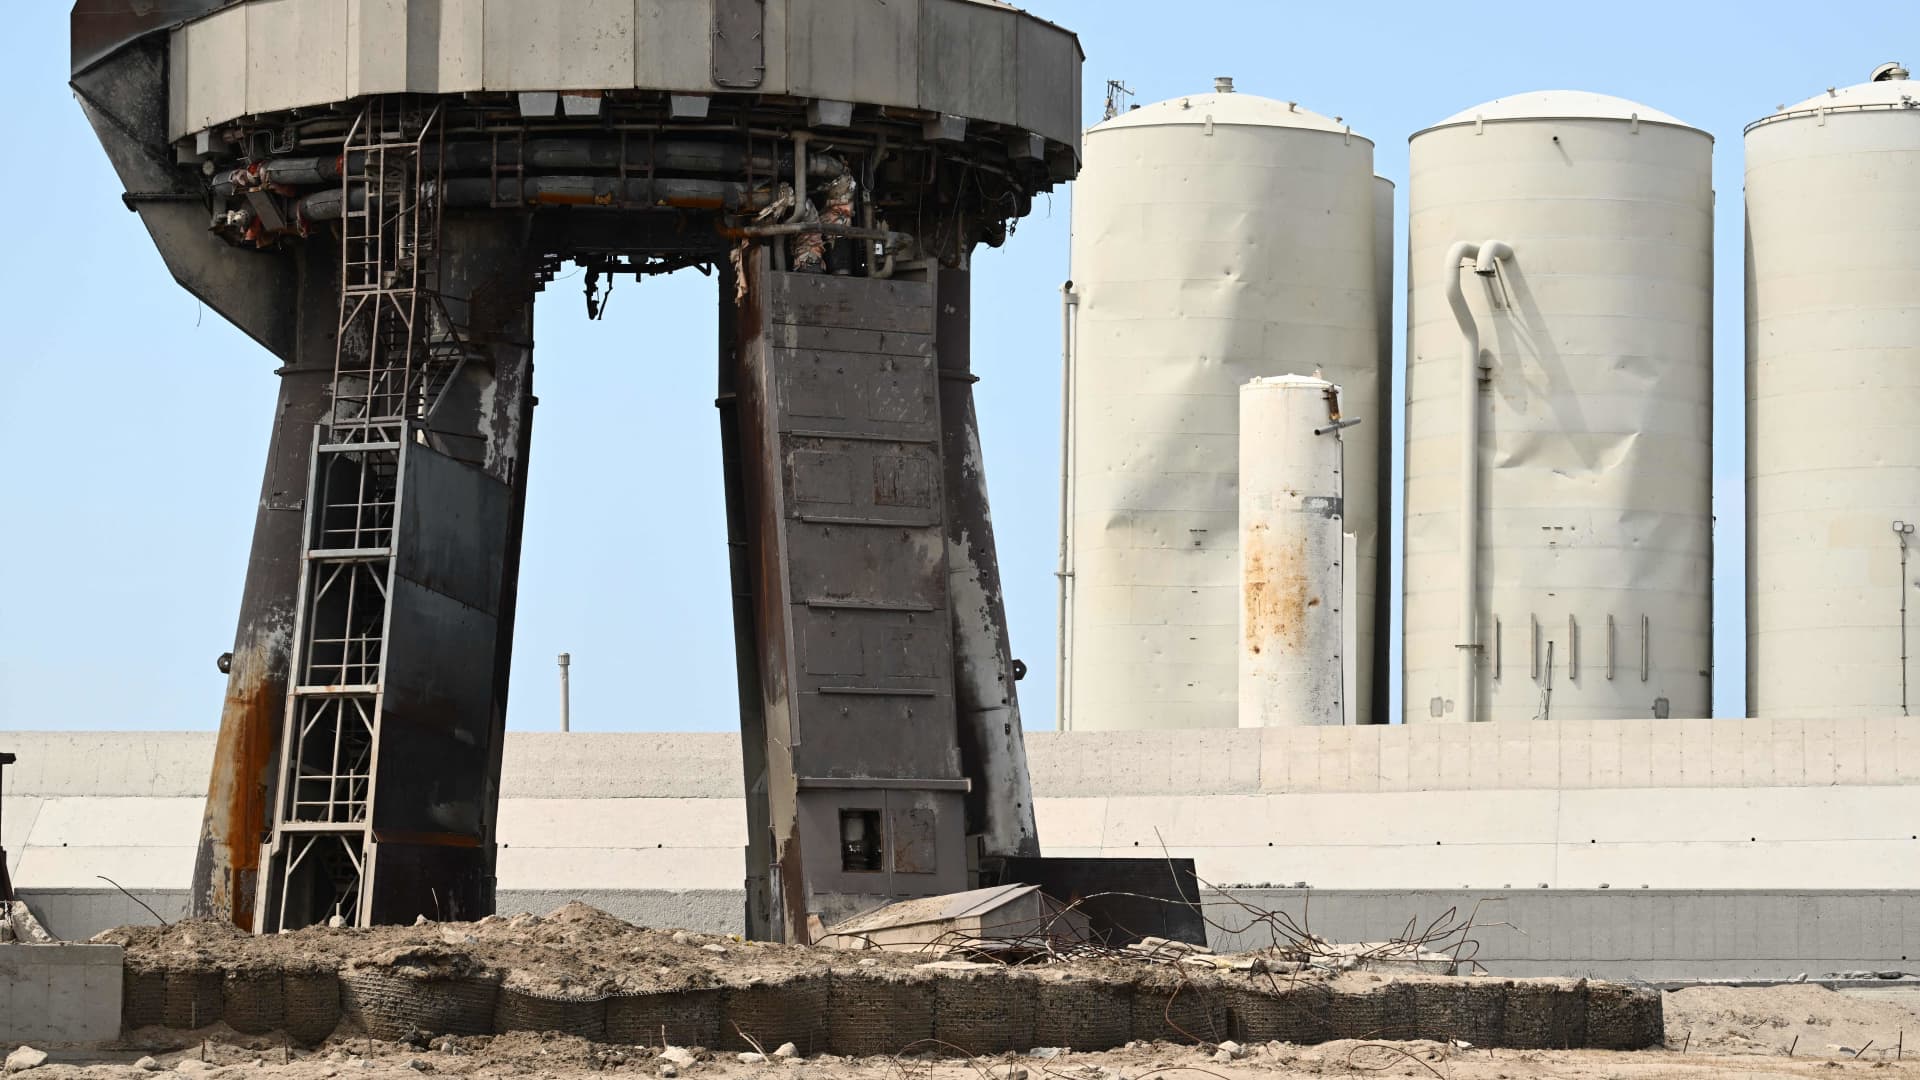 Debris litters the launch pad and dmaged tanks (R rear) on April 22, 2023, after the SpaceX Starship lifted off on April 20 for a flight test from Starbase in Boca Chica, Texas.